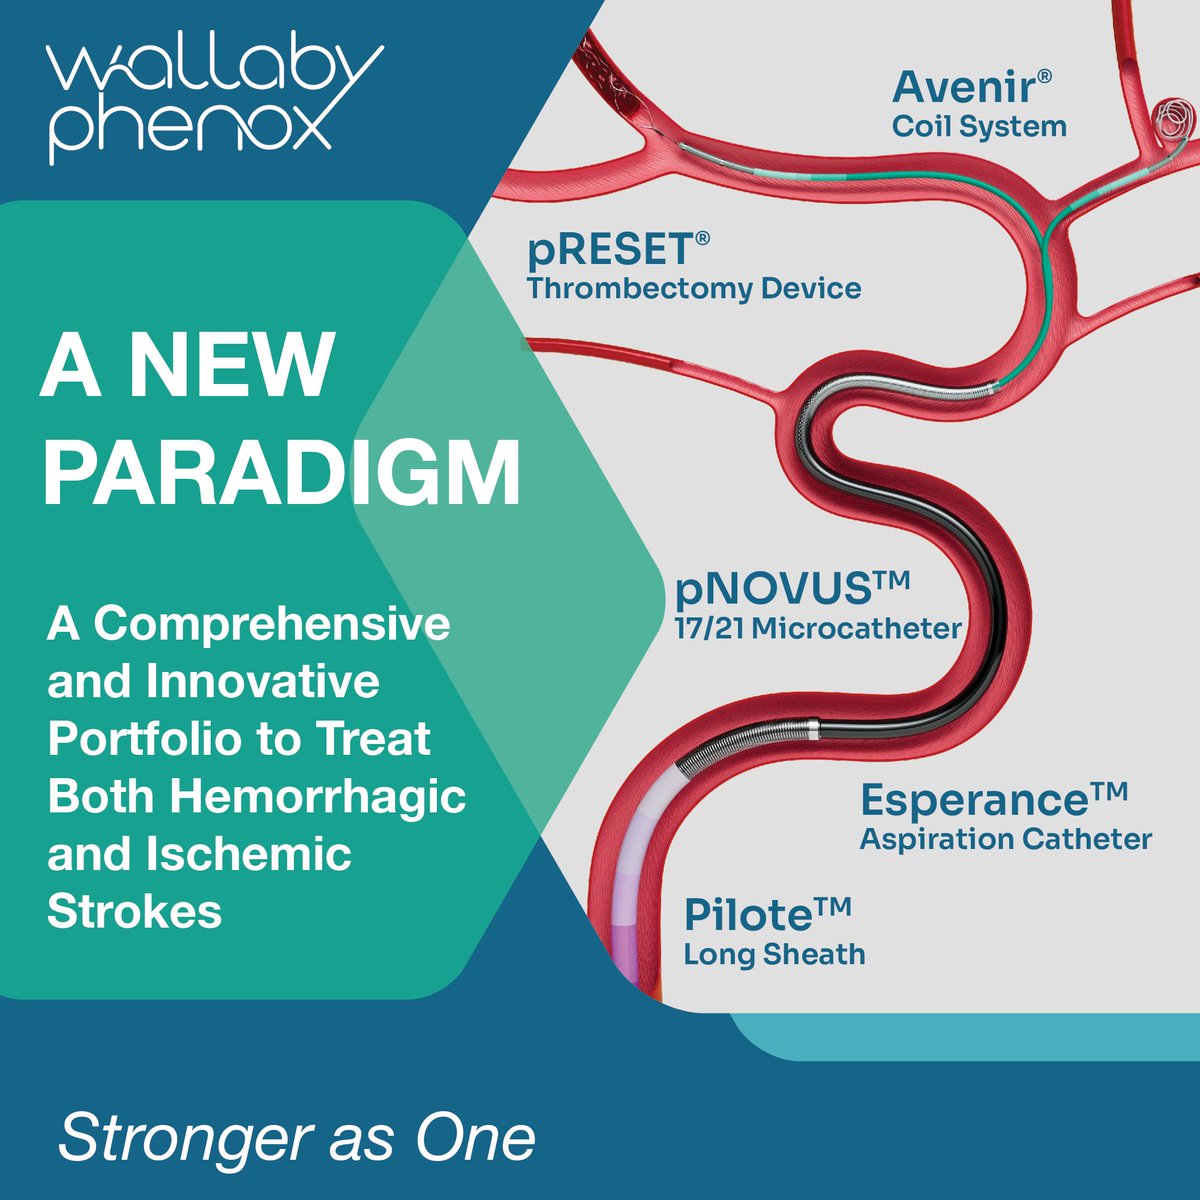 6 FDA clearances in the last 12 months has transformed WallabyPhenox's portfolio in the US!

Think of about stroke treatment differently
#ANewParadigm #WallabyPhenox #StrongerAsOne #Stroke #InterventionalNeurology